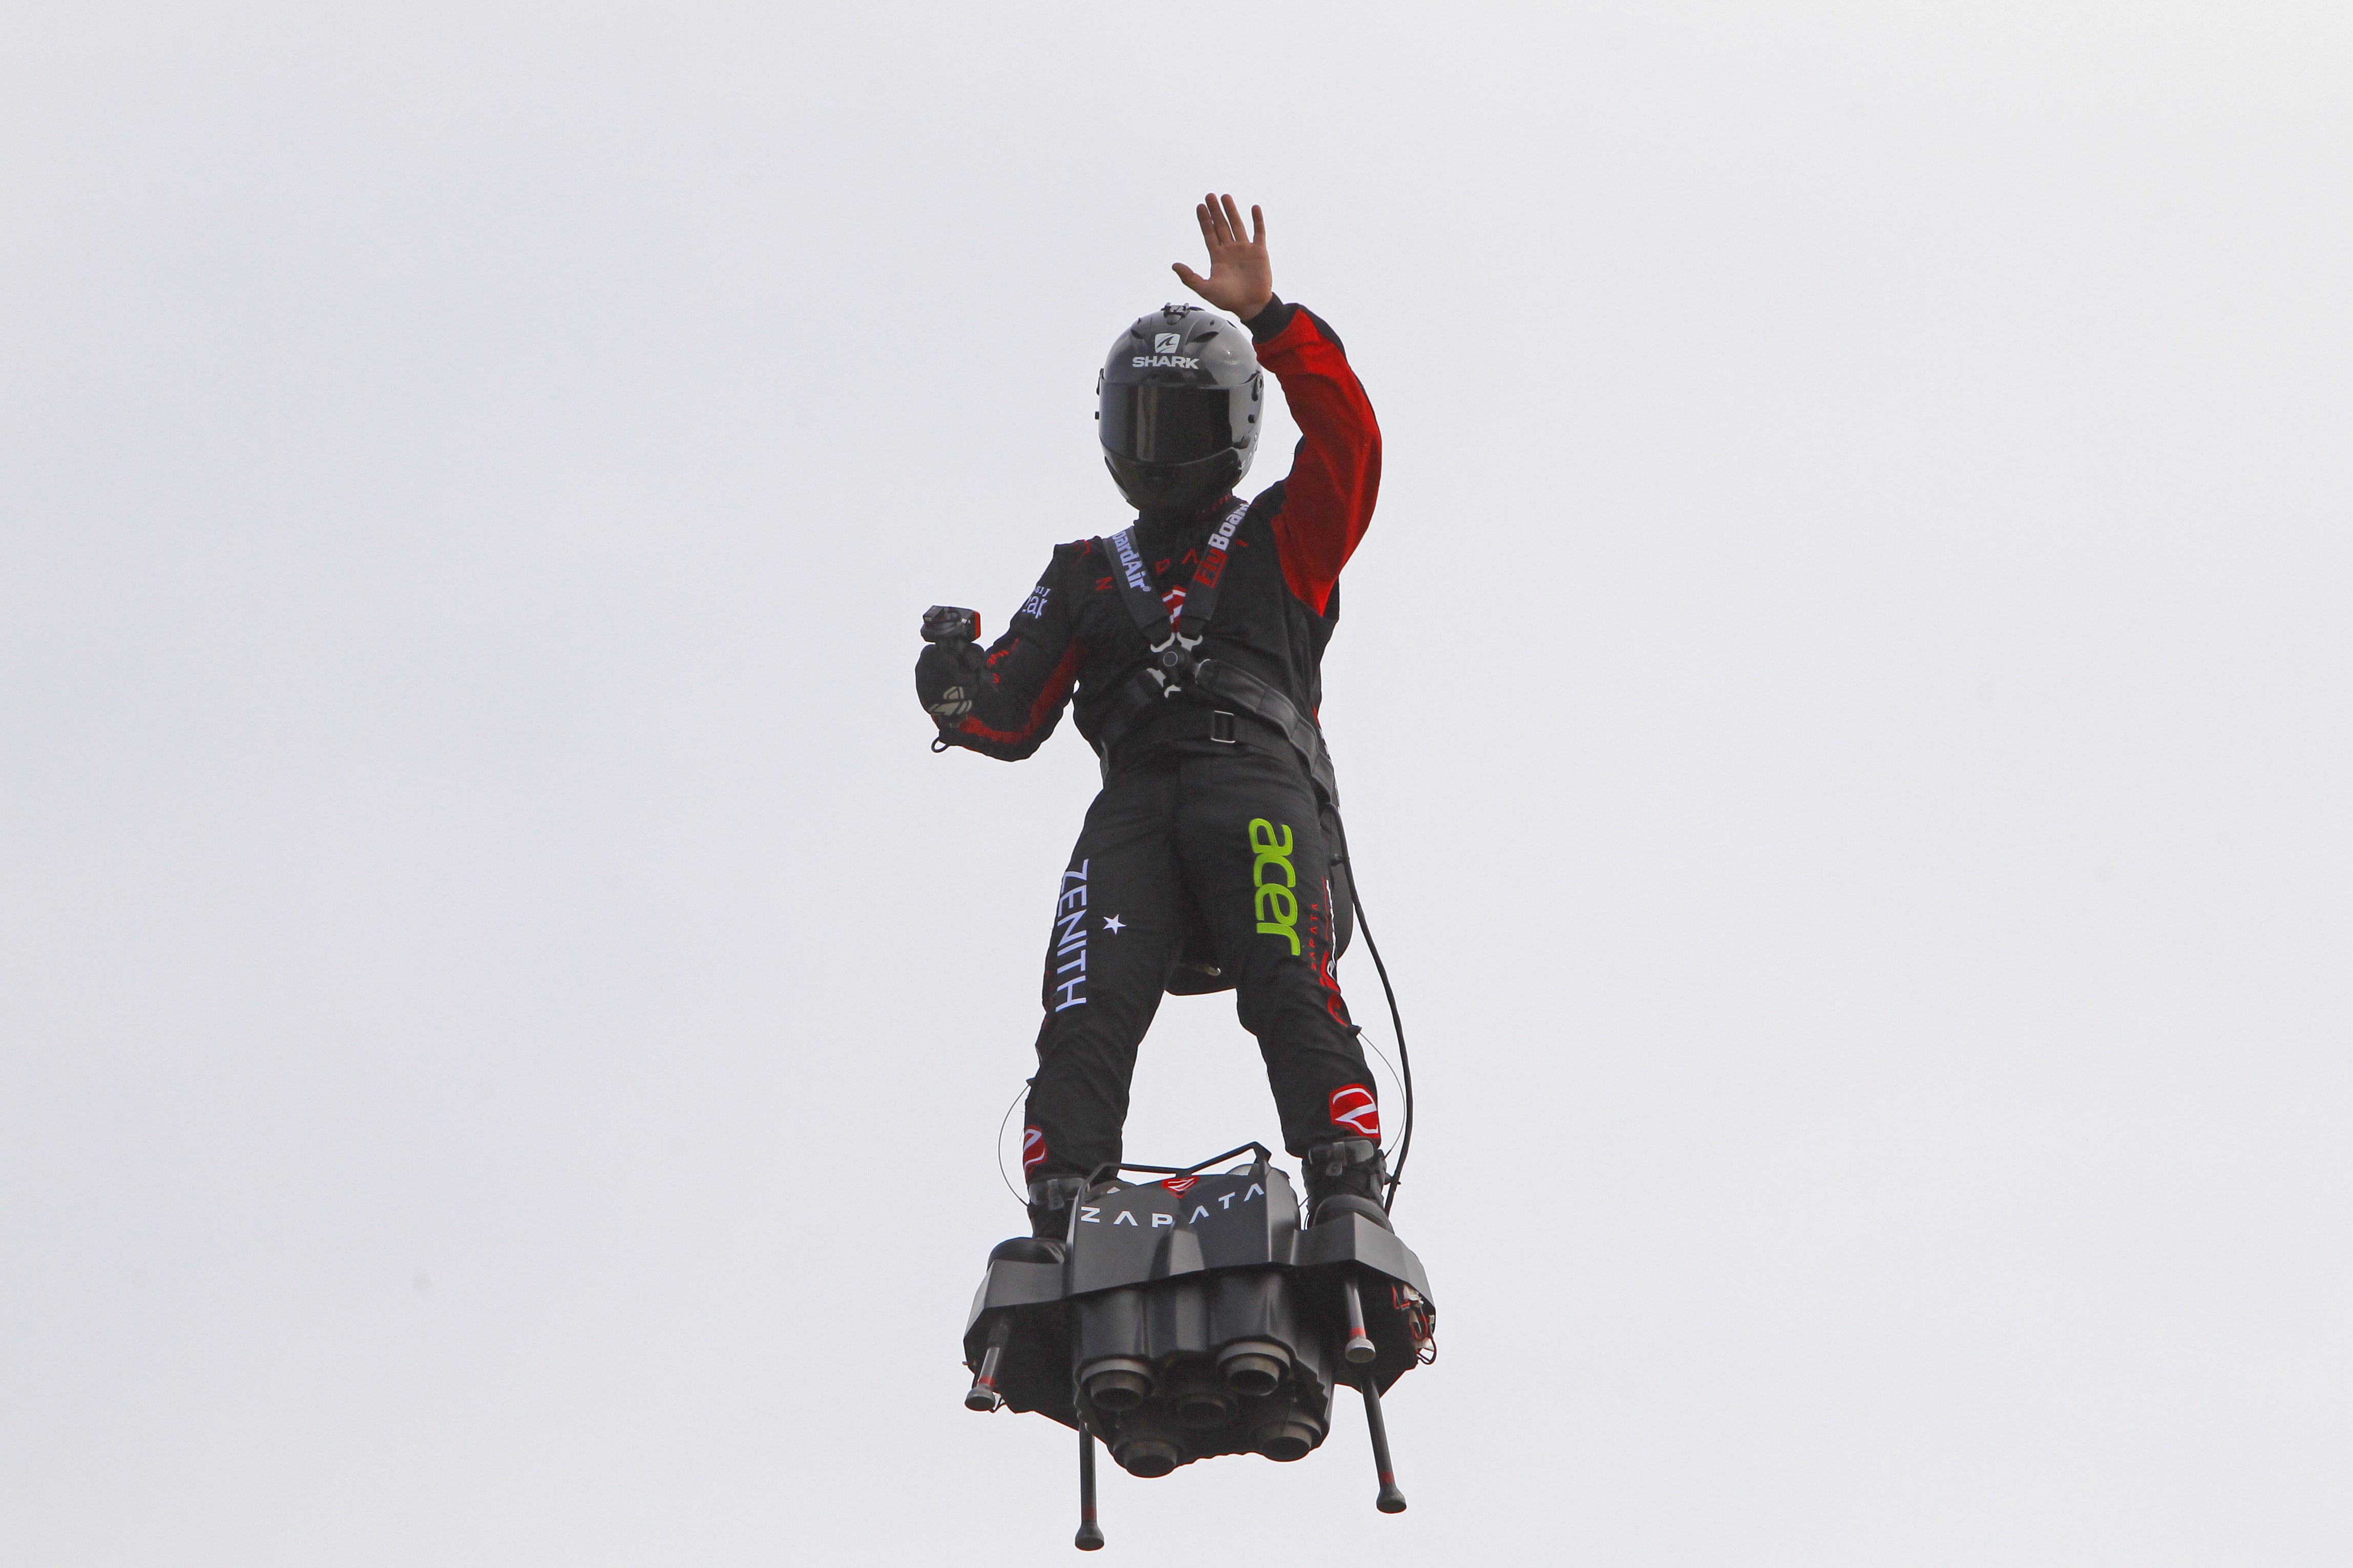 Frenchman to try flying across Channel on his flyboard